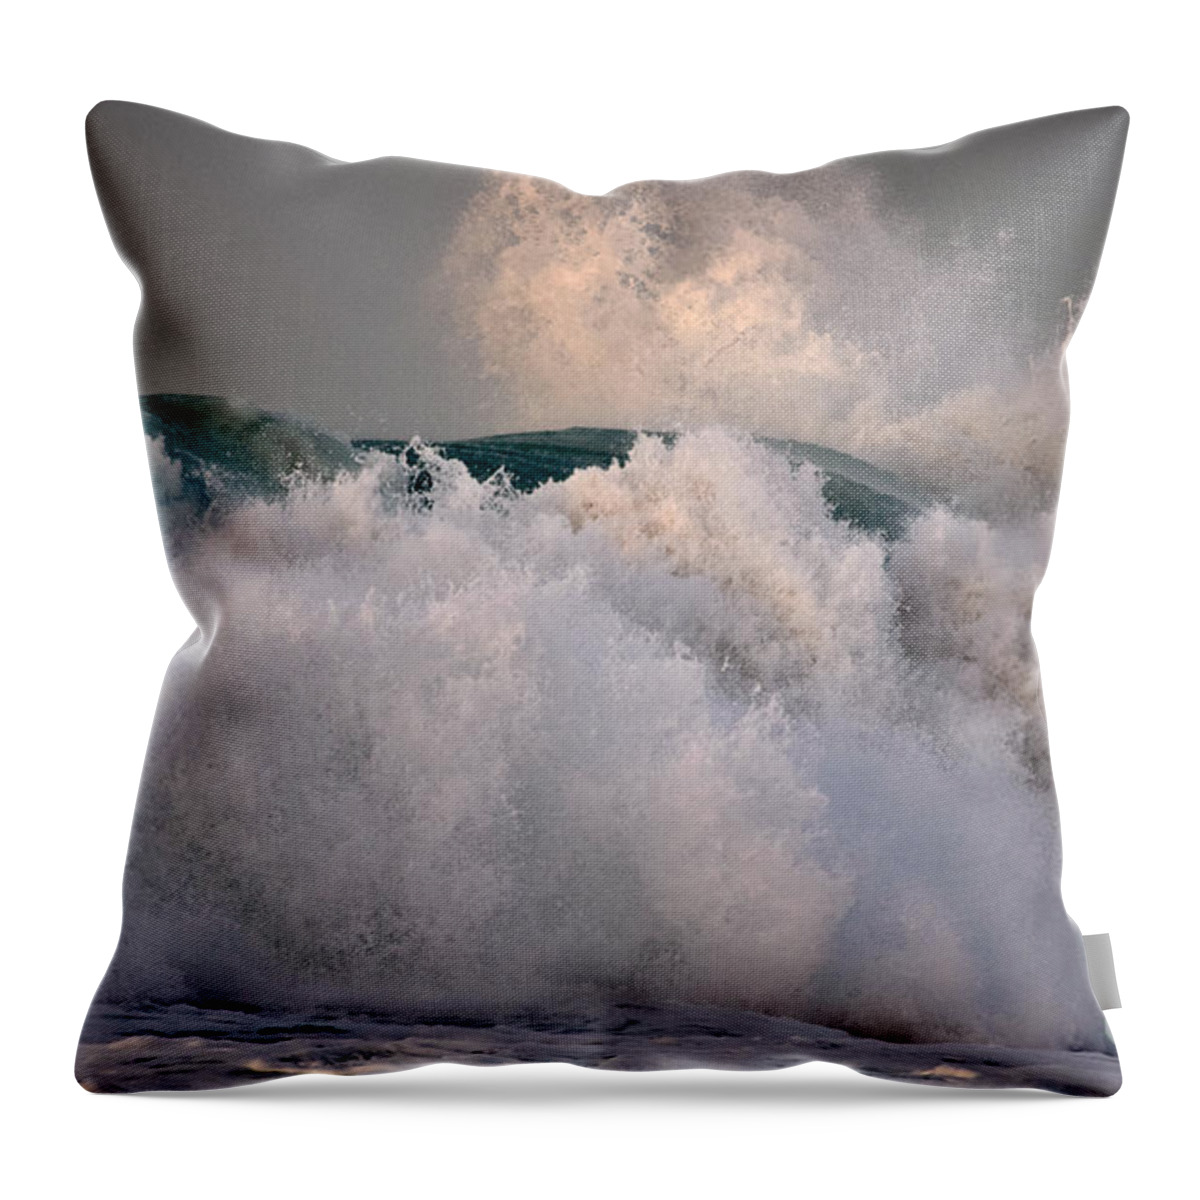 Polihale Beach Throw Pillow featuring the photograph Polihale Wave of Unbridled Joy by Debra Banks